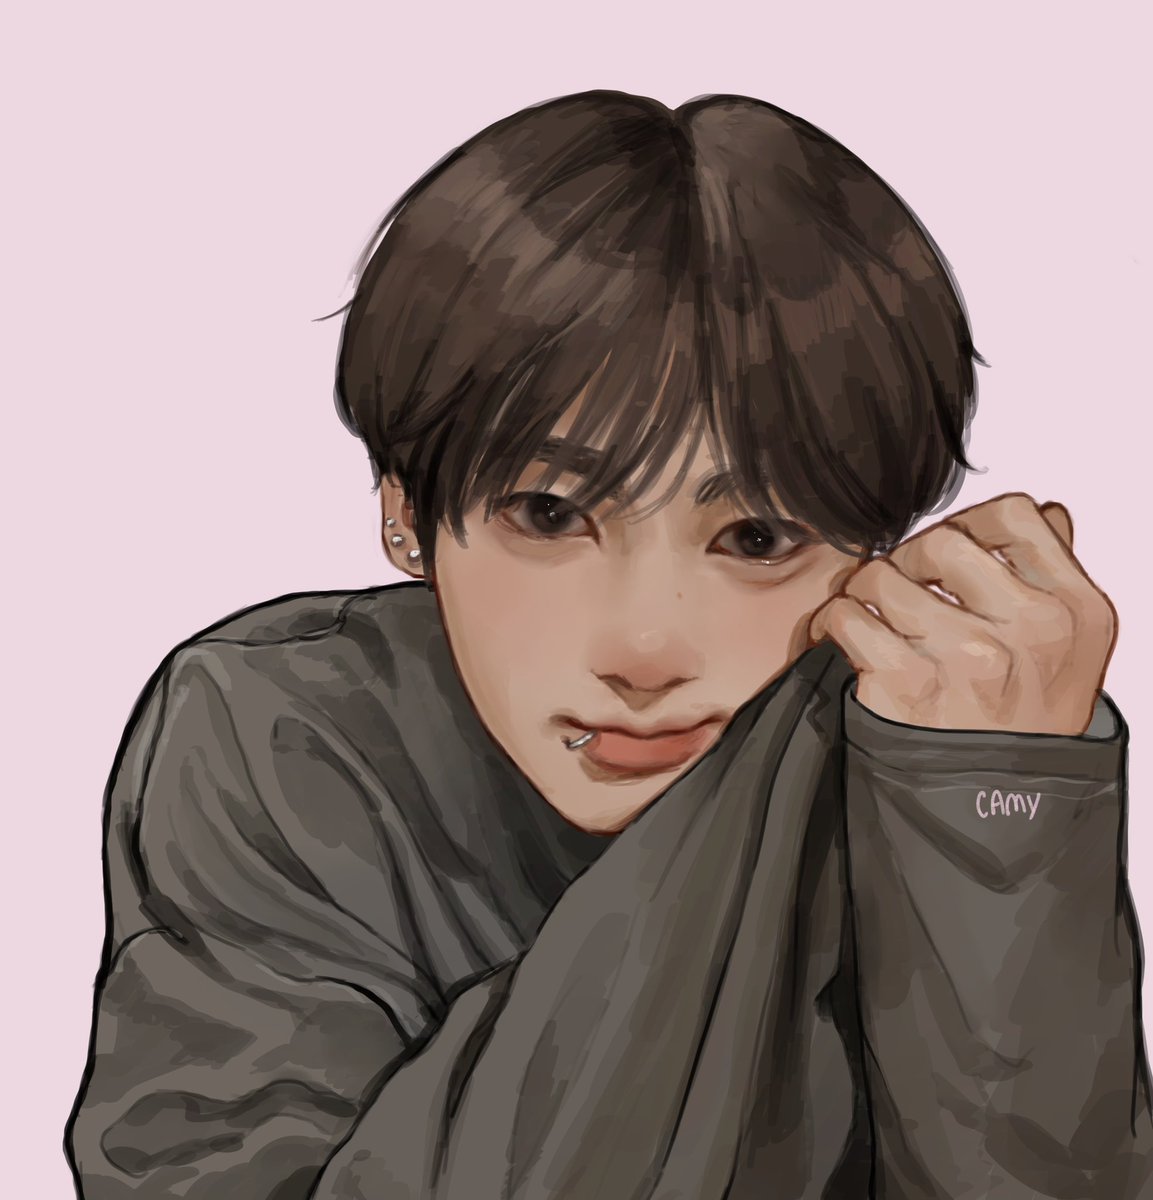 「omg i'm obsessed with pink and jungkook 」|camy 🌙のイラスト